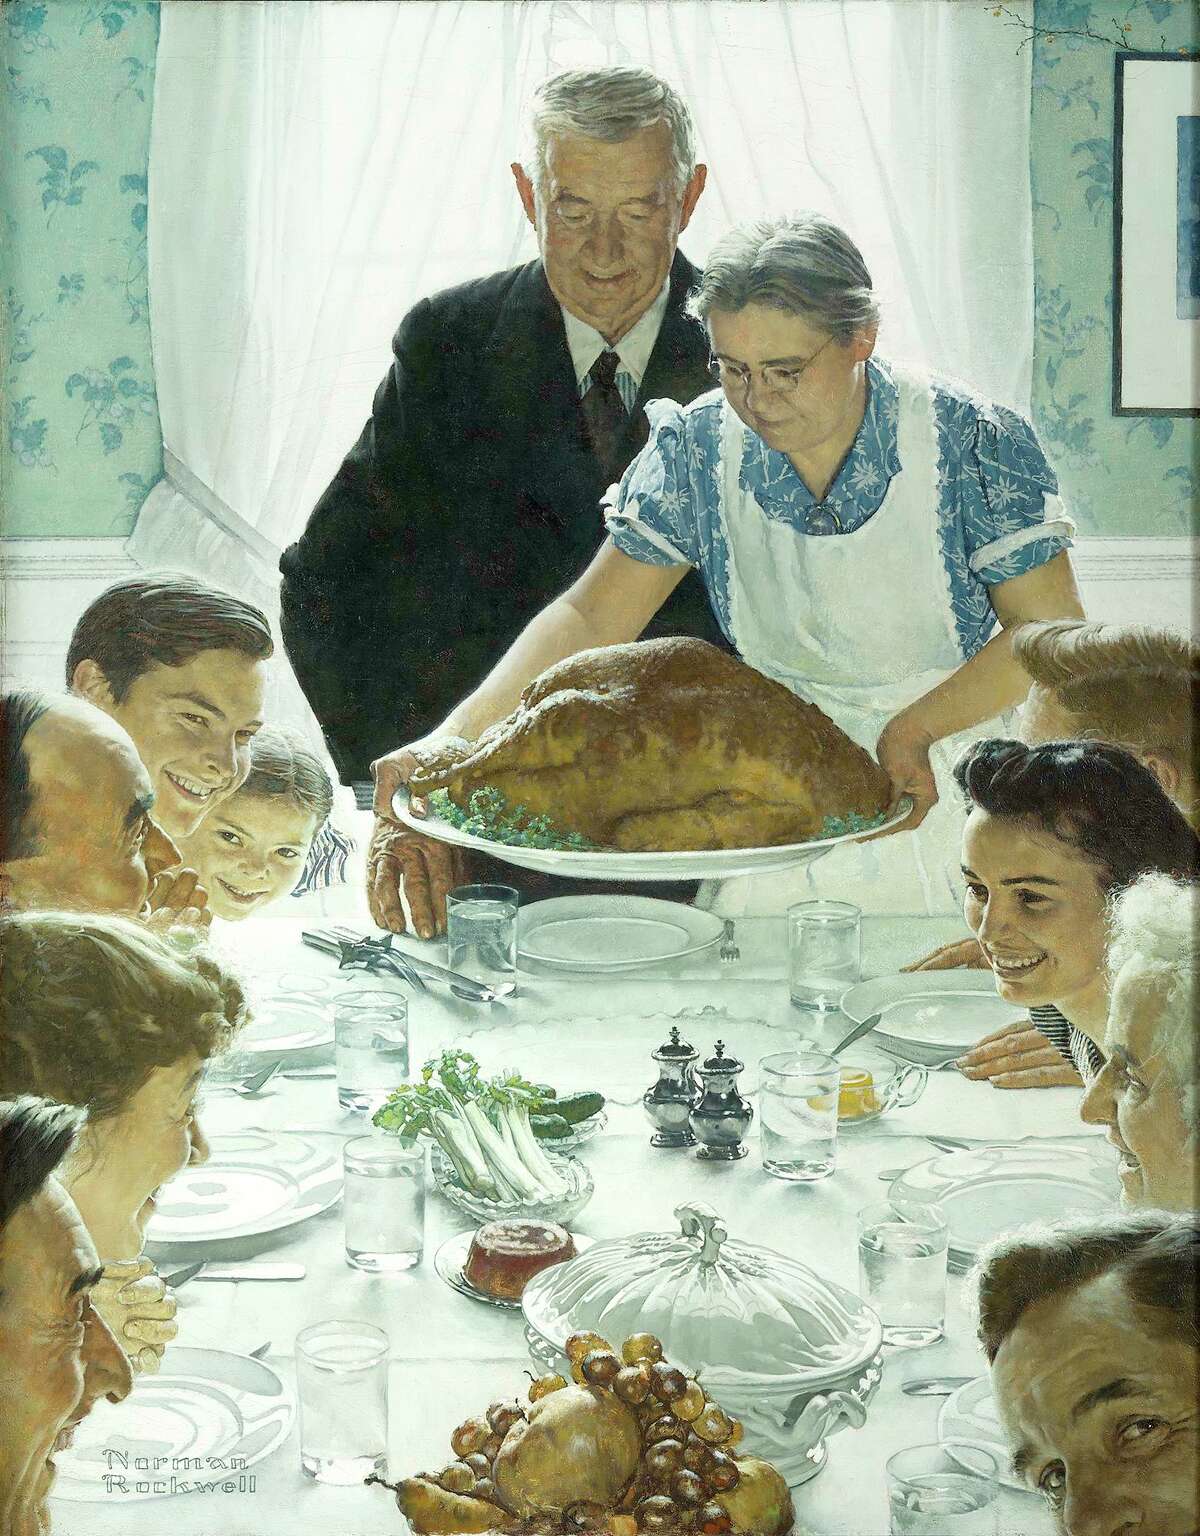 The oil painting "Freedom from Want," created as an illustration for the Saturday Evening Post in 1943, is among works on view Dec. 15-March 22 in "Norman Rockwell: American Freedom" at the Museum of Fine Arts, Houston.